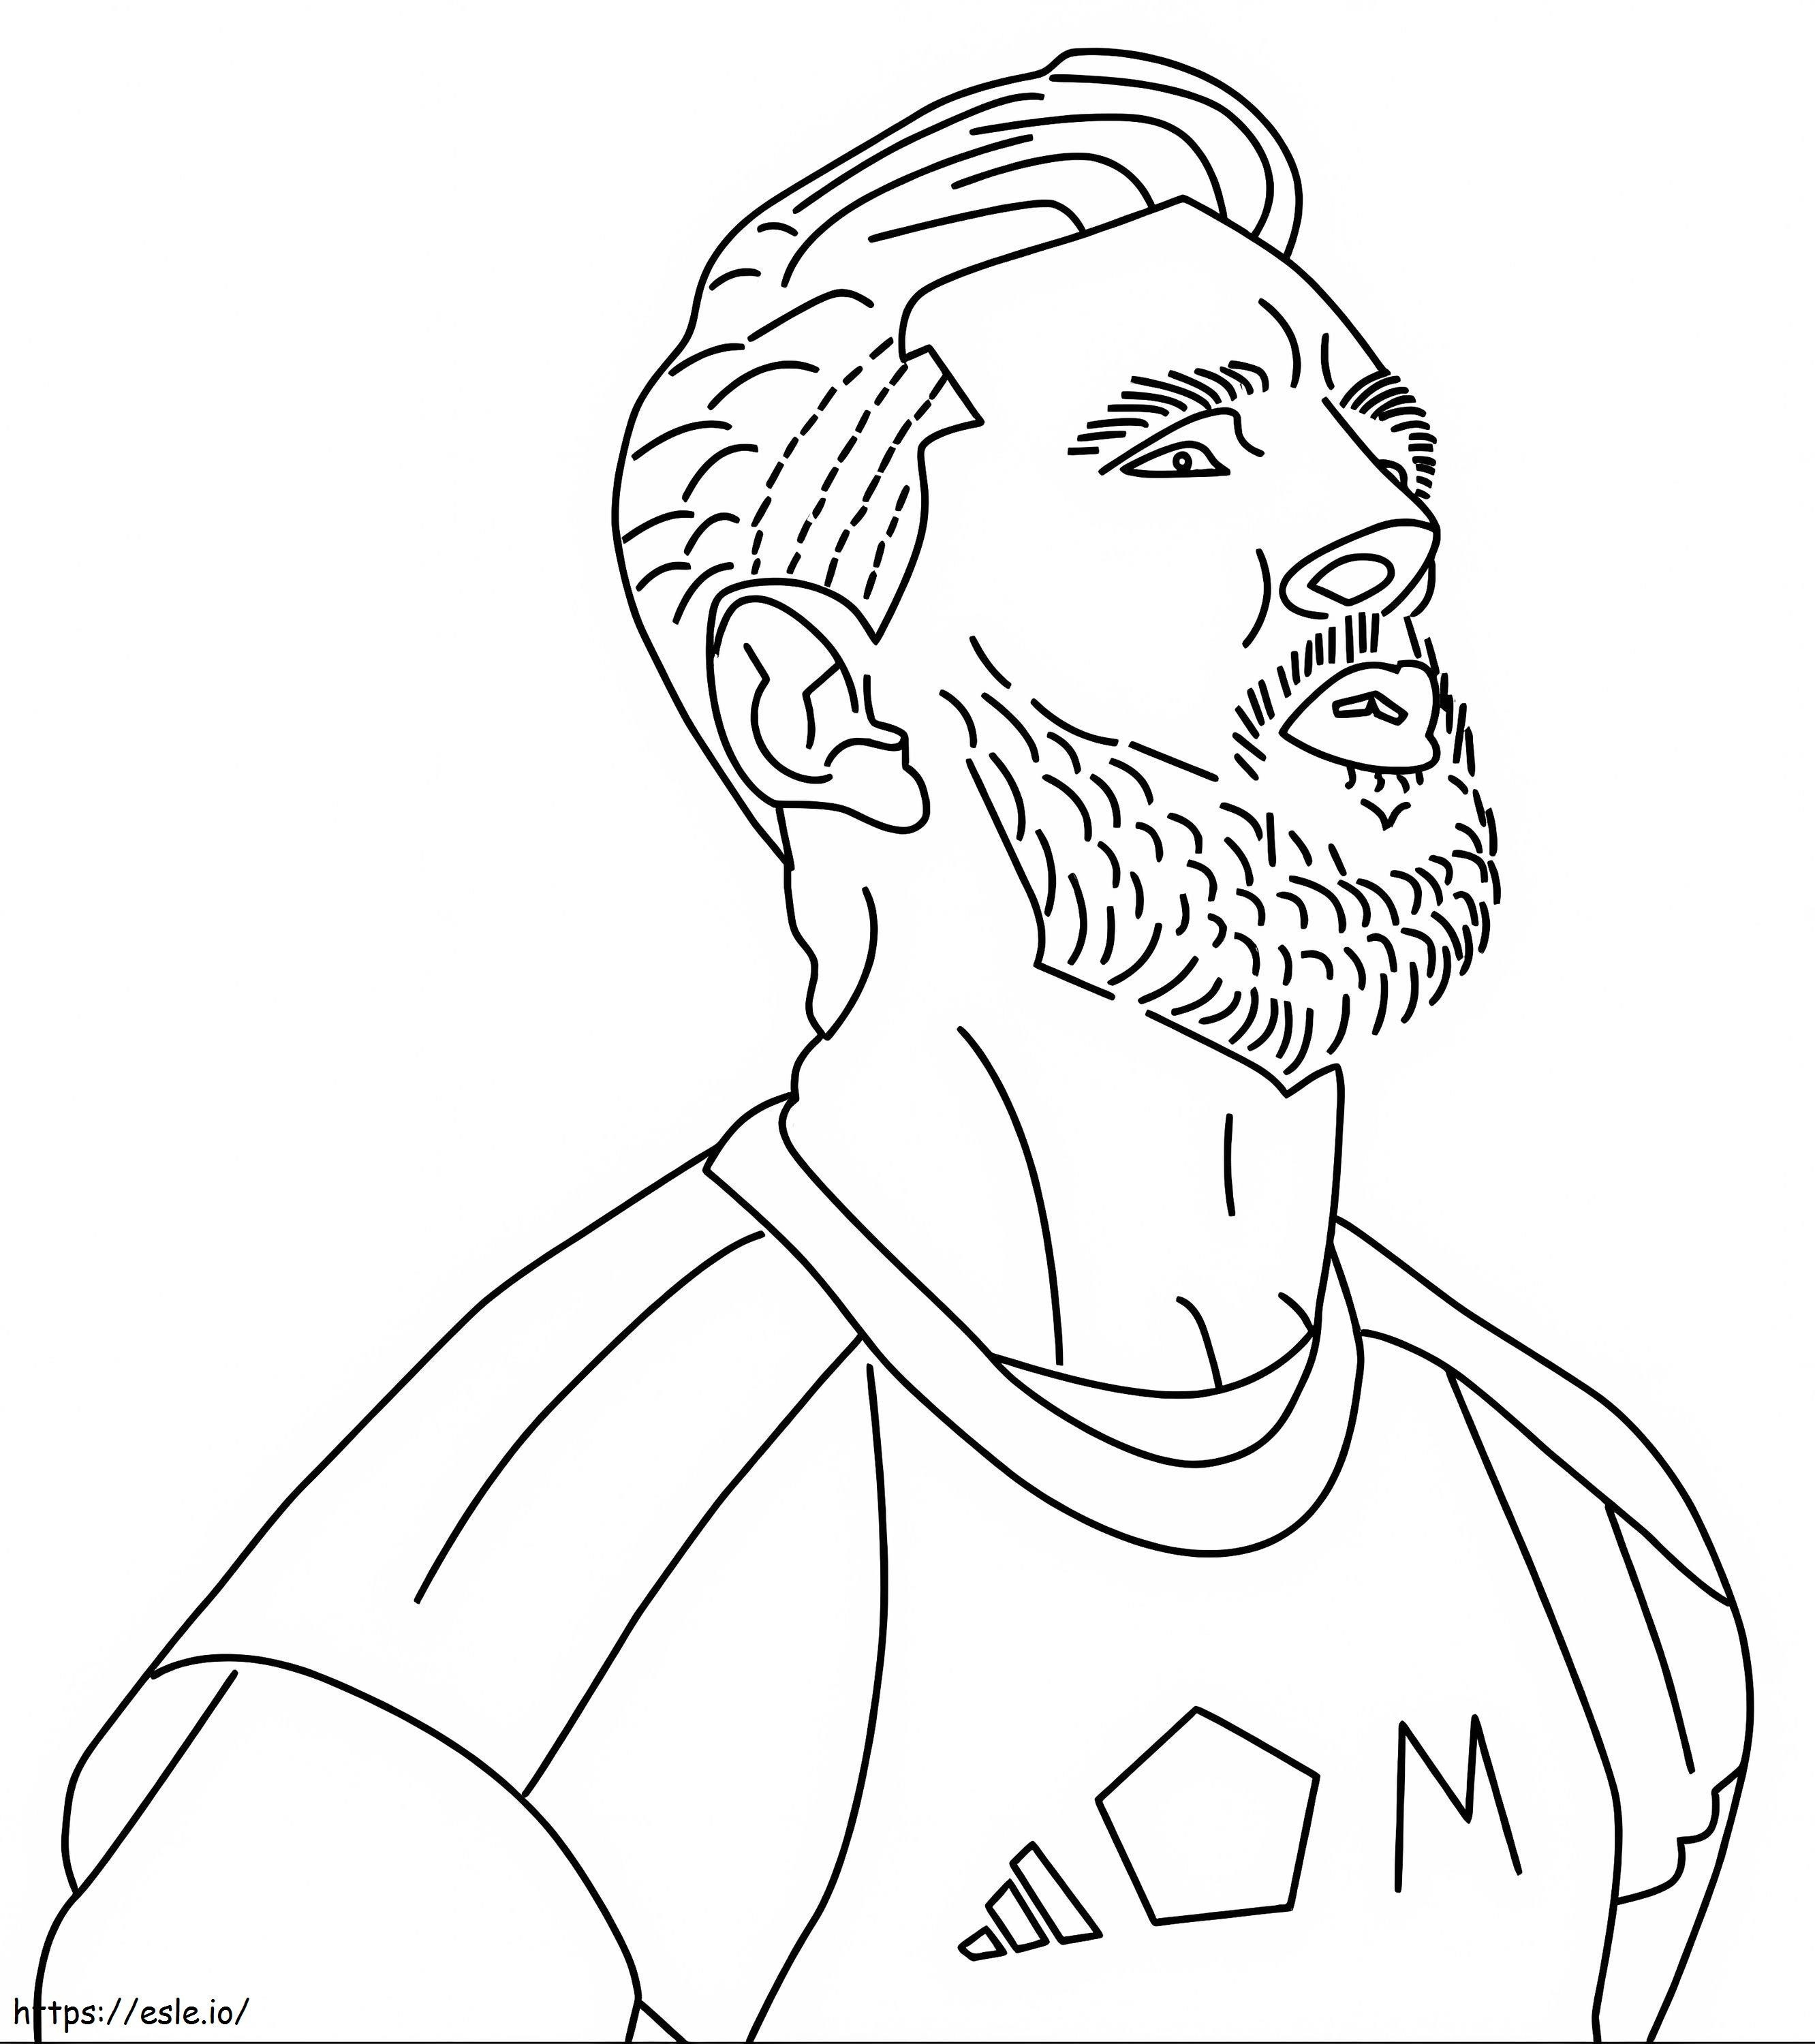 Lionel Messi'S Face coloring page